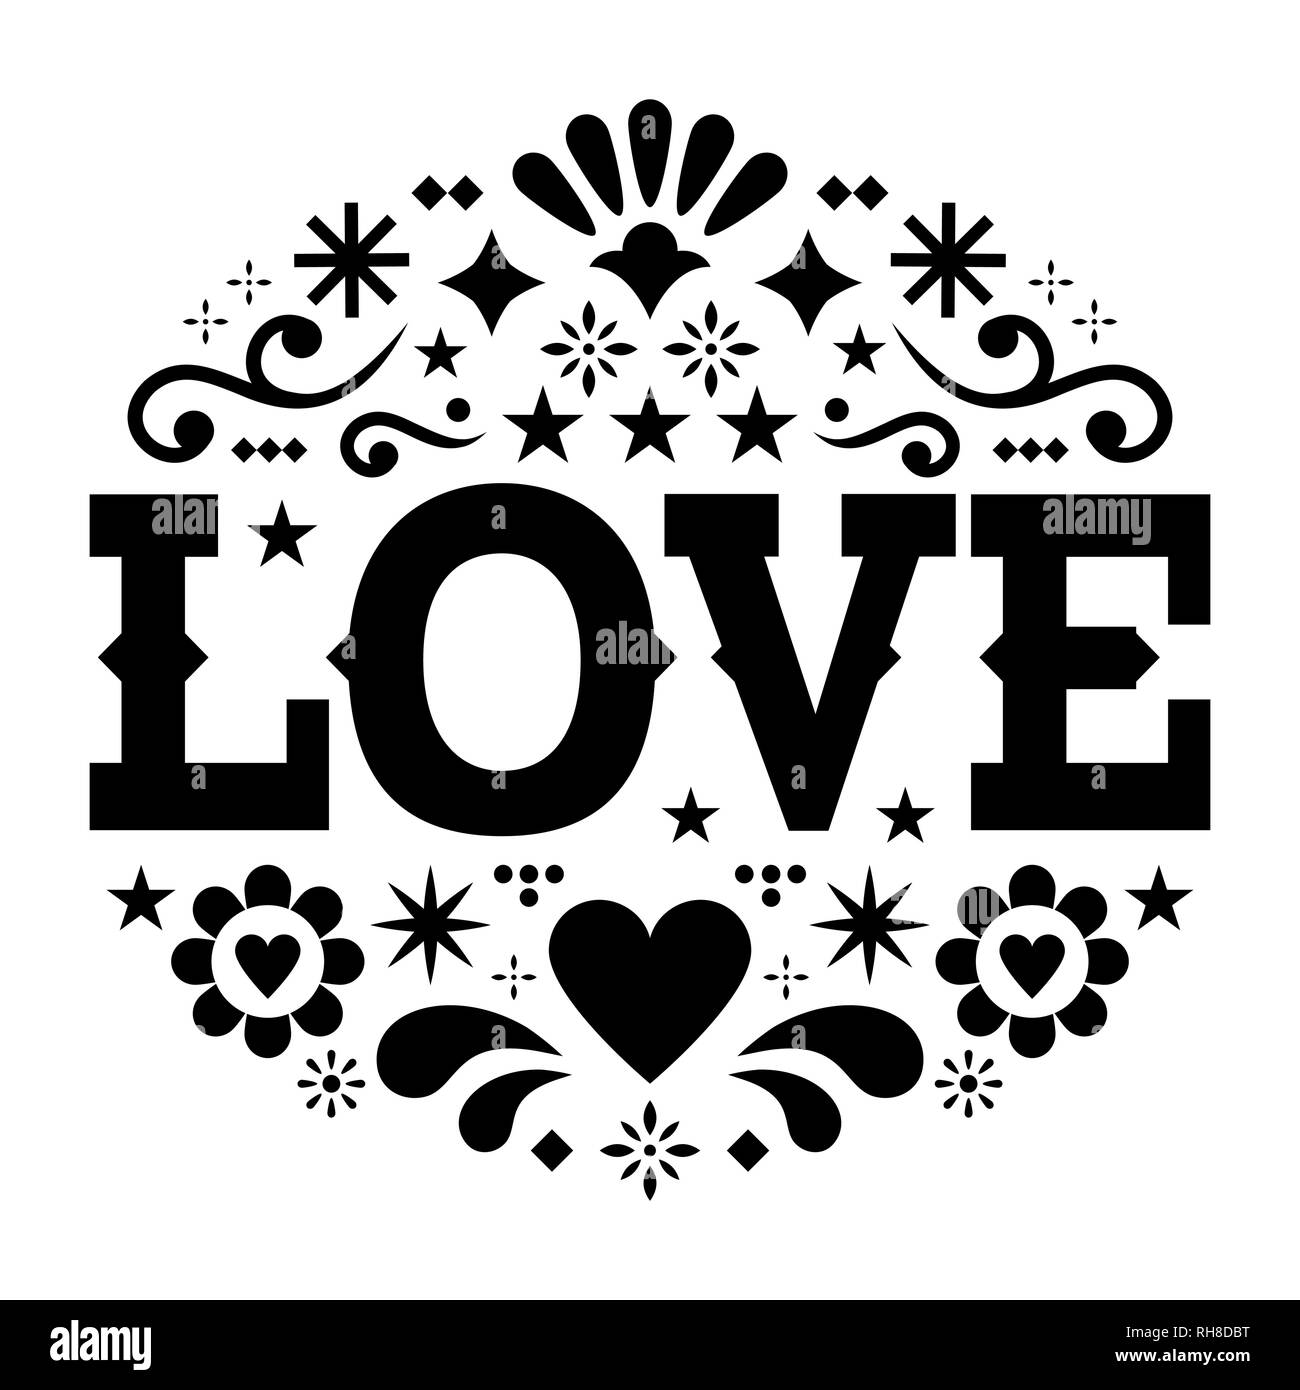 https://c8.alamy.com/comp/RH8DBT/valentines-day-vector-greeting-card-love-mexican-folk-art-pattern-with-flowers-hearts-and-abstract-shapes-wedding-invitation-RH8DBT.jpg